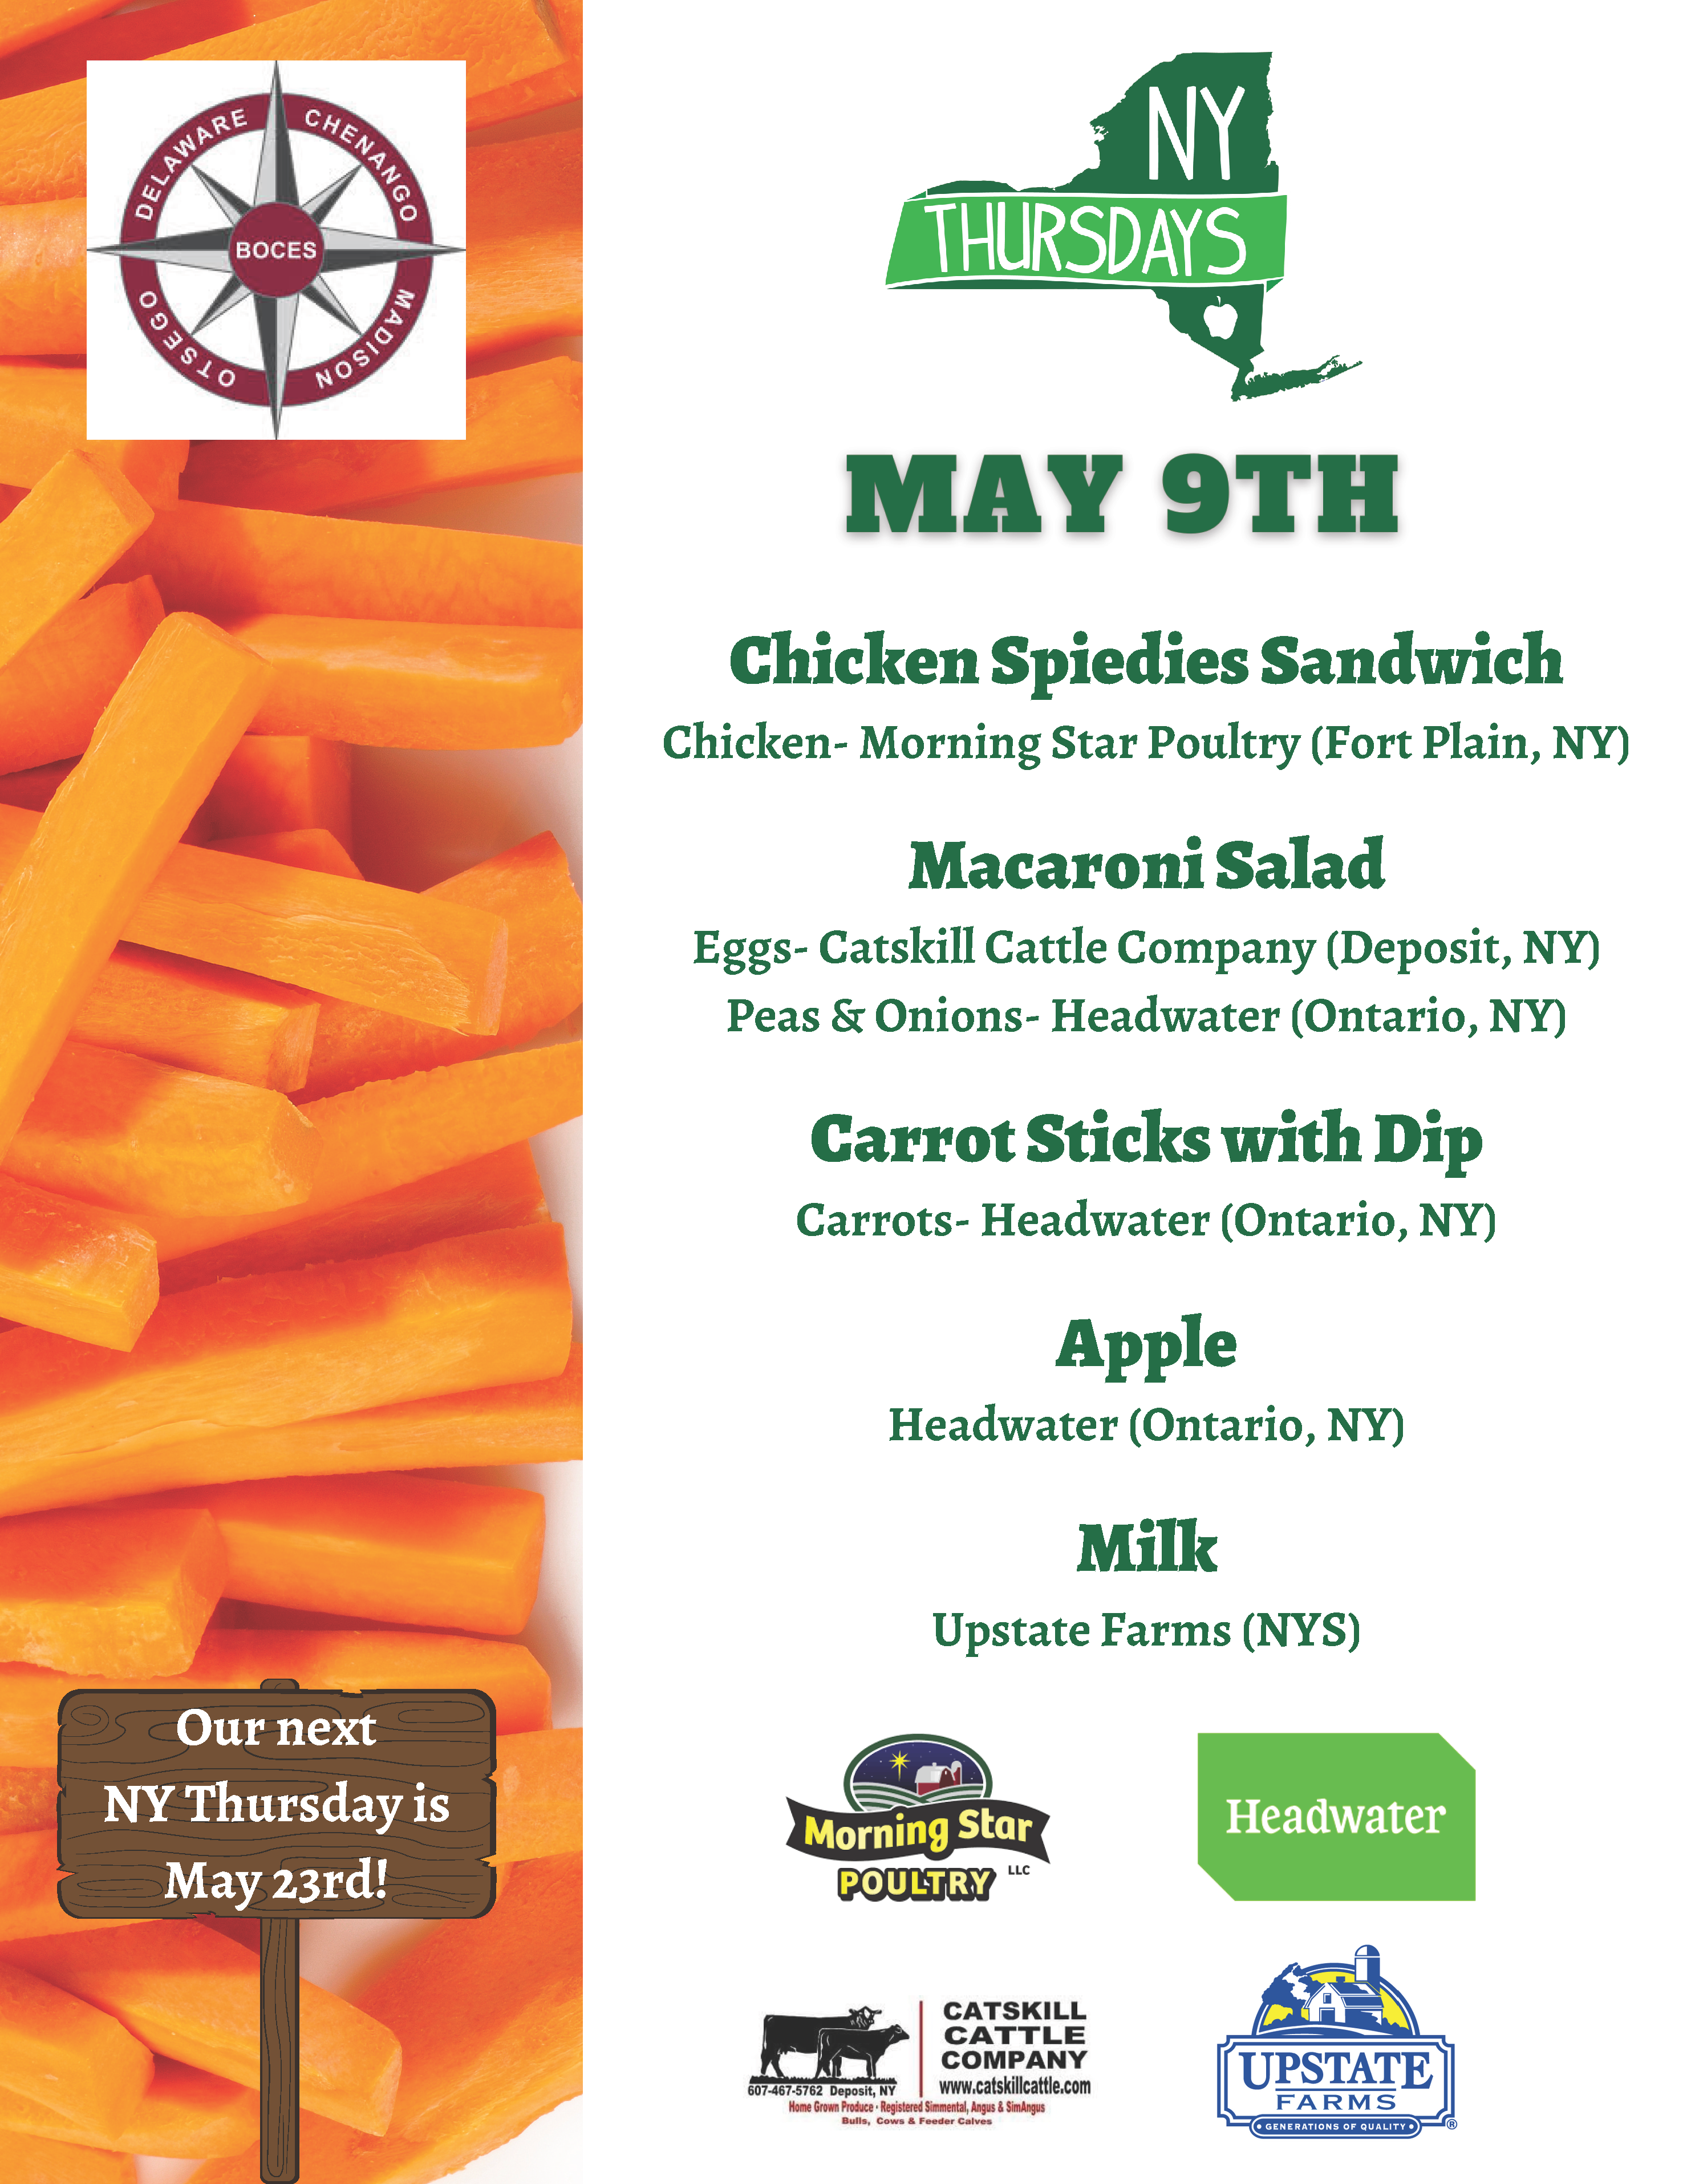 New York Thursdays May 9th Chicken Spiedies Sandwich Chicken - Morning Star Poultry (Fort Plain, NY) Macaroni Salad Eggs - Catskill Cattle Company (Deposit, NY) Peas & Onions - Headwater (Ontario, NY) Carrot Sticks with Dip Carrots - Headwater (Ontario, NY) Apple Headwater (Ontario, NY) Milk Upstate Farms (NYS) Our Next NY Thursday is May 23rd